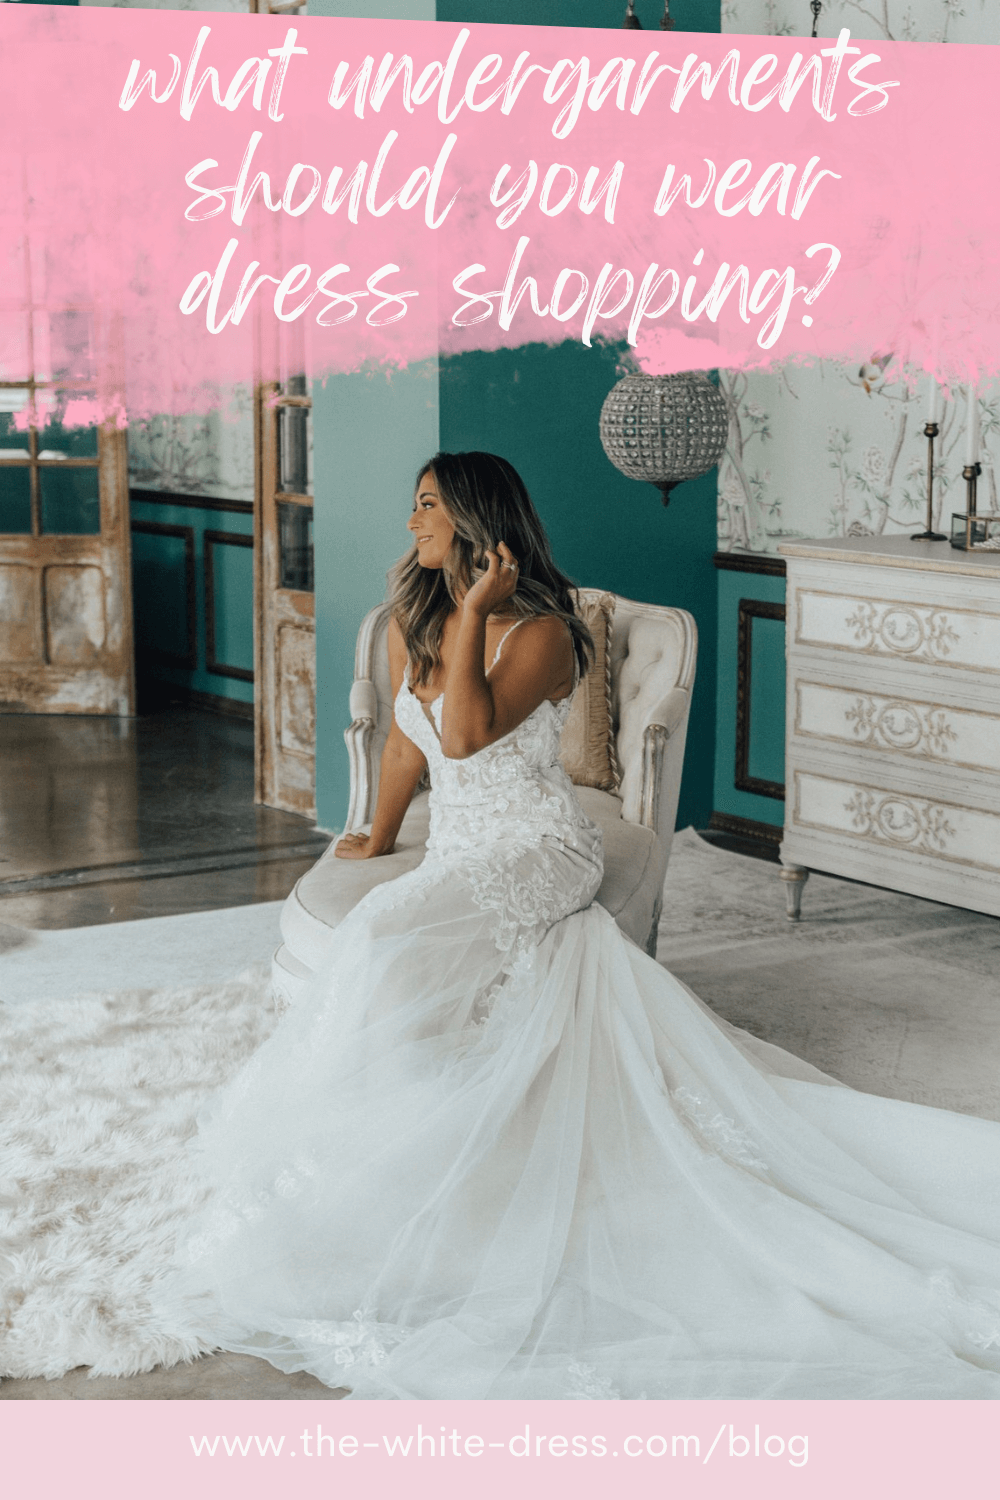 How to Choose the Right Wedding Undergarments for Your Wedding